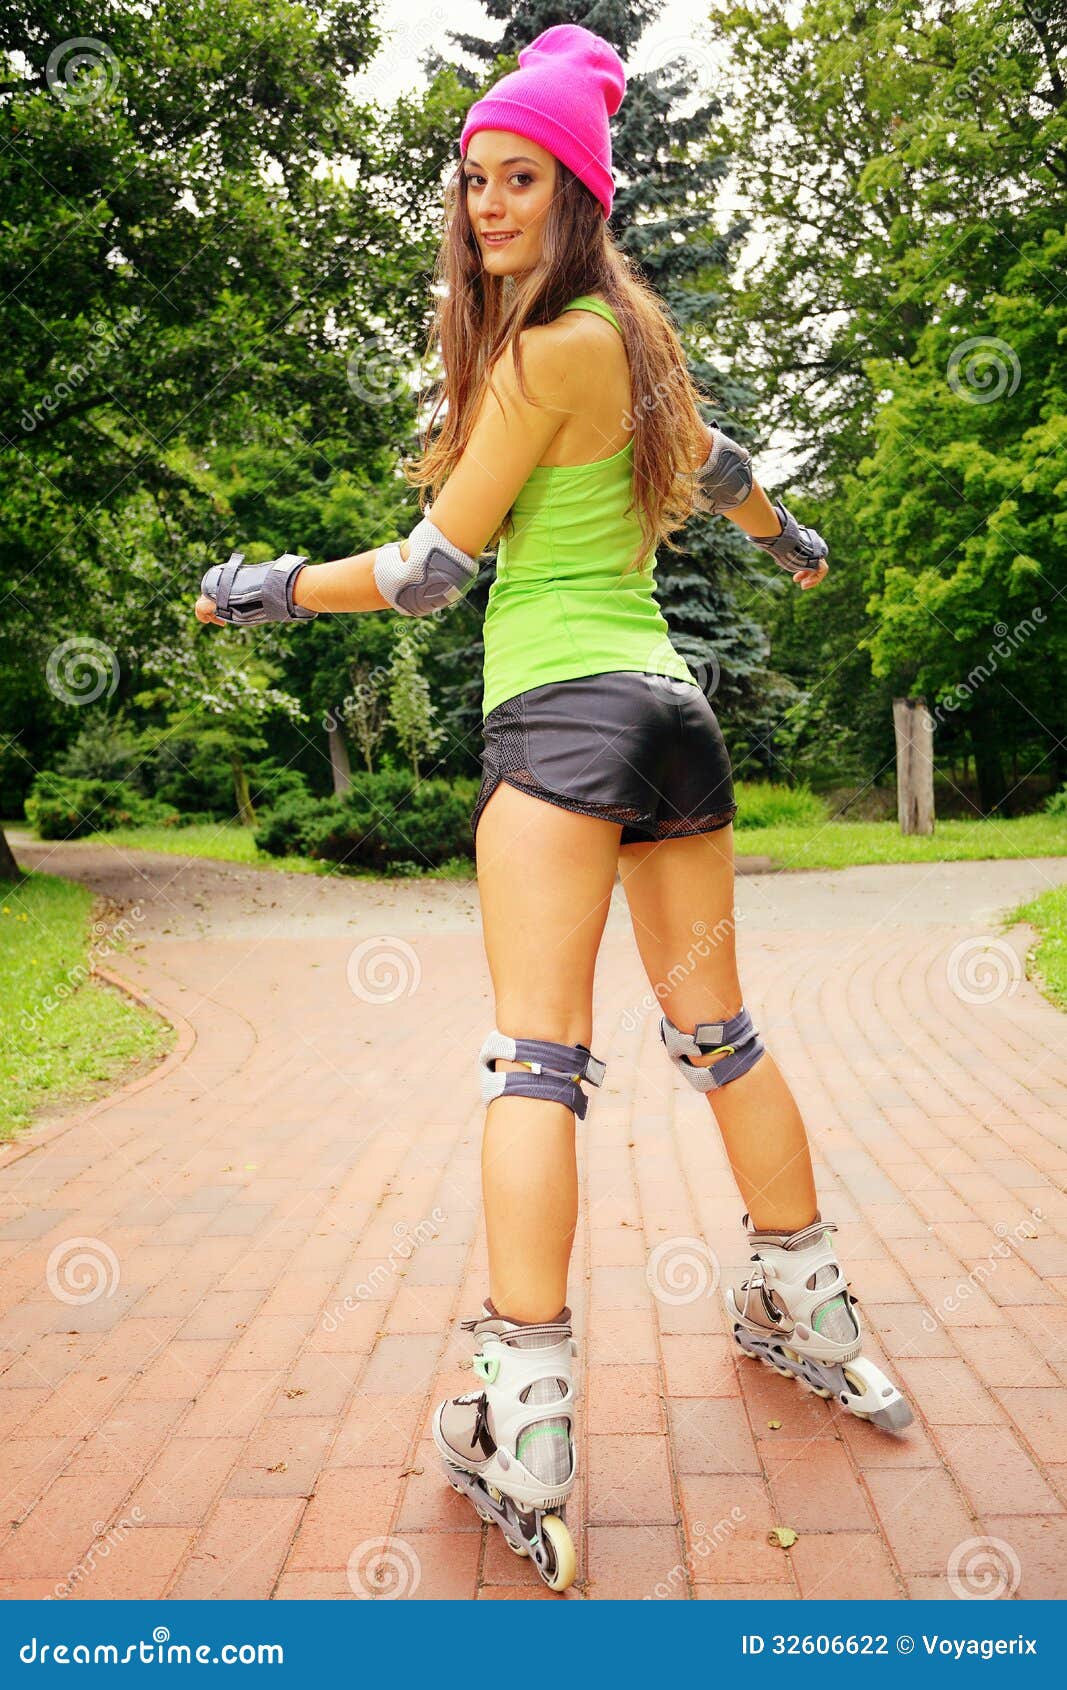 Woman Roller Skating Sport Activity In Park Stock Photography - Image